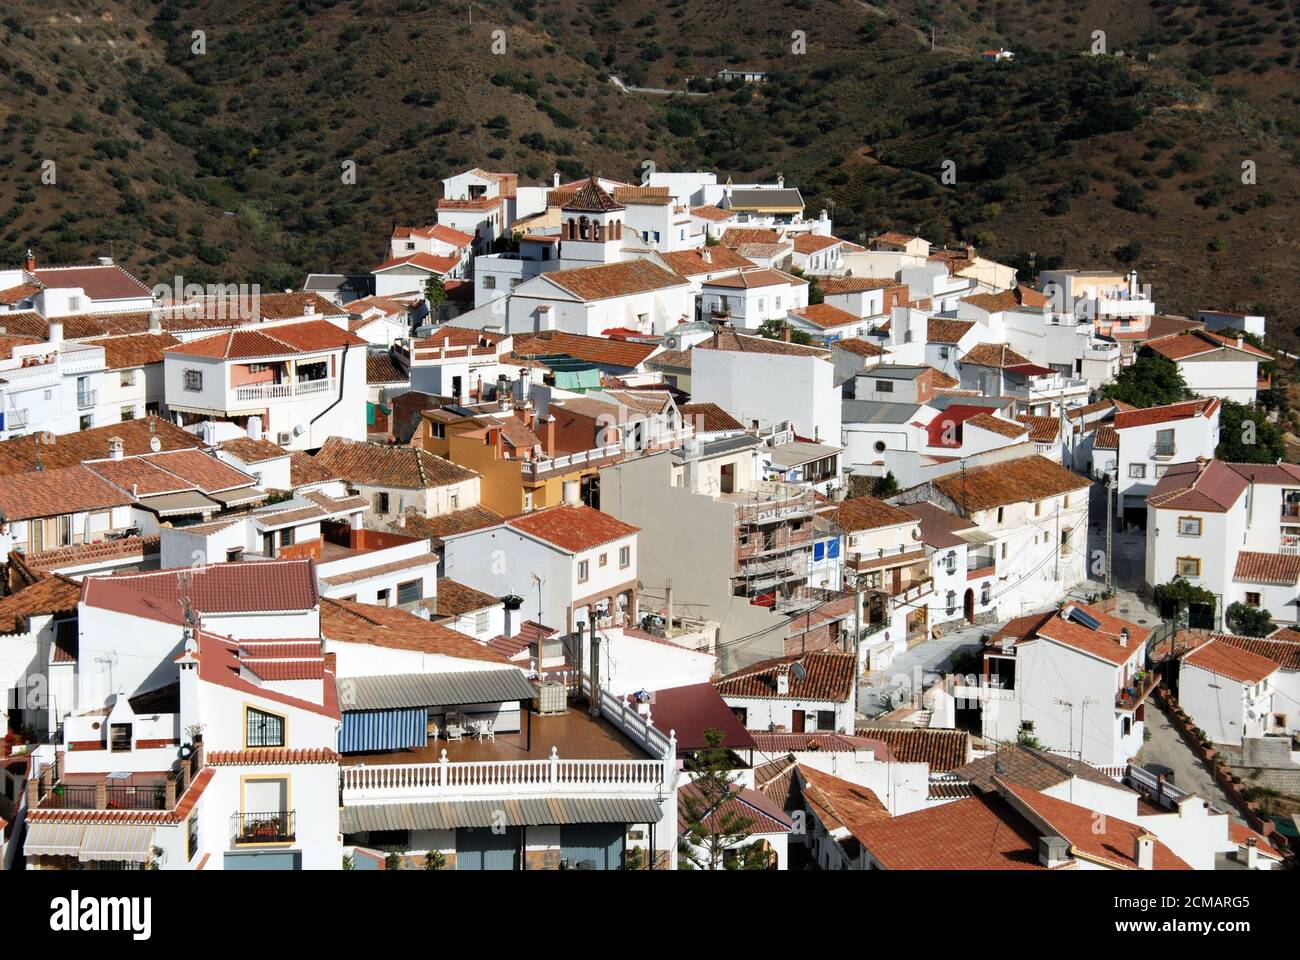 Elevated view of a whitewashed village (pueblo blanco), Moclinejo, Costa del Sol, Malaga Province, Andalucia, Spain. Stock Photo